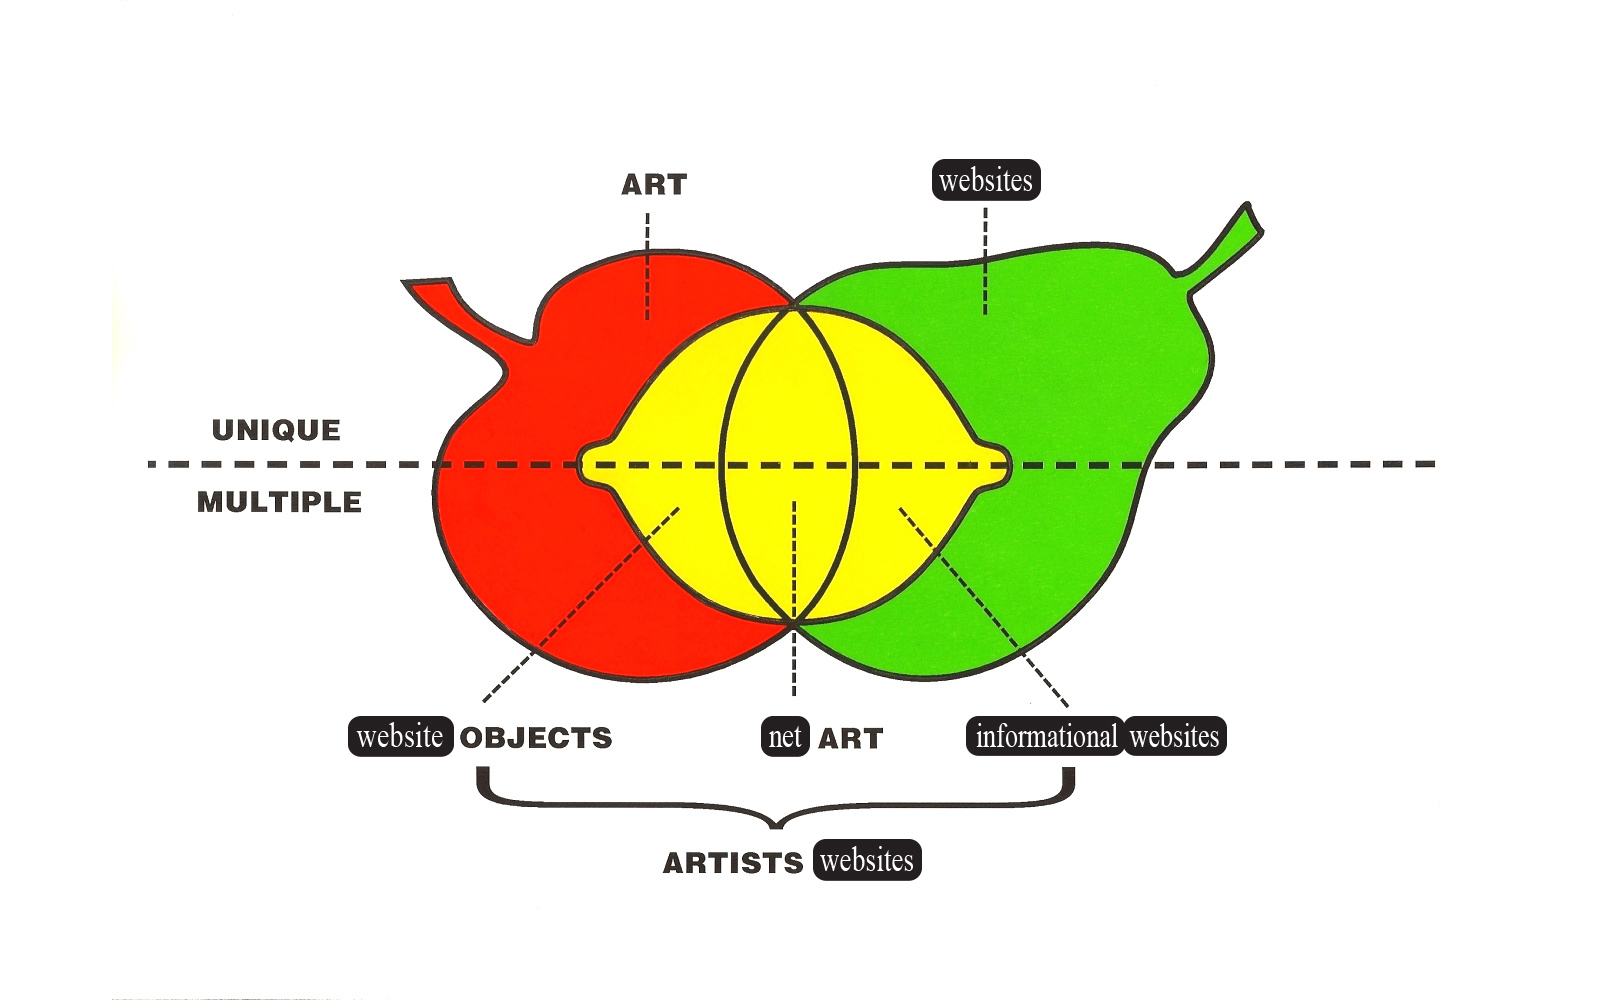 A venn diagram-like graph of three fruits overlapping: a red apple, a yellow lemon, and a green pear. This graph was originally created by curator Clive Phillpot for his book 